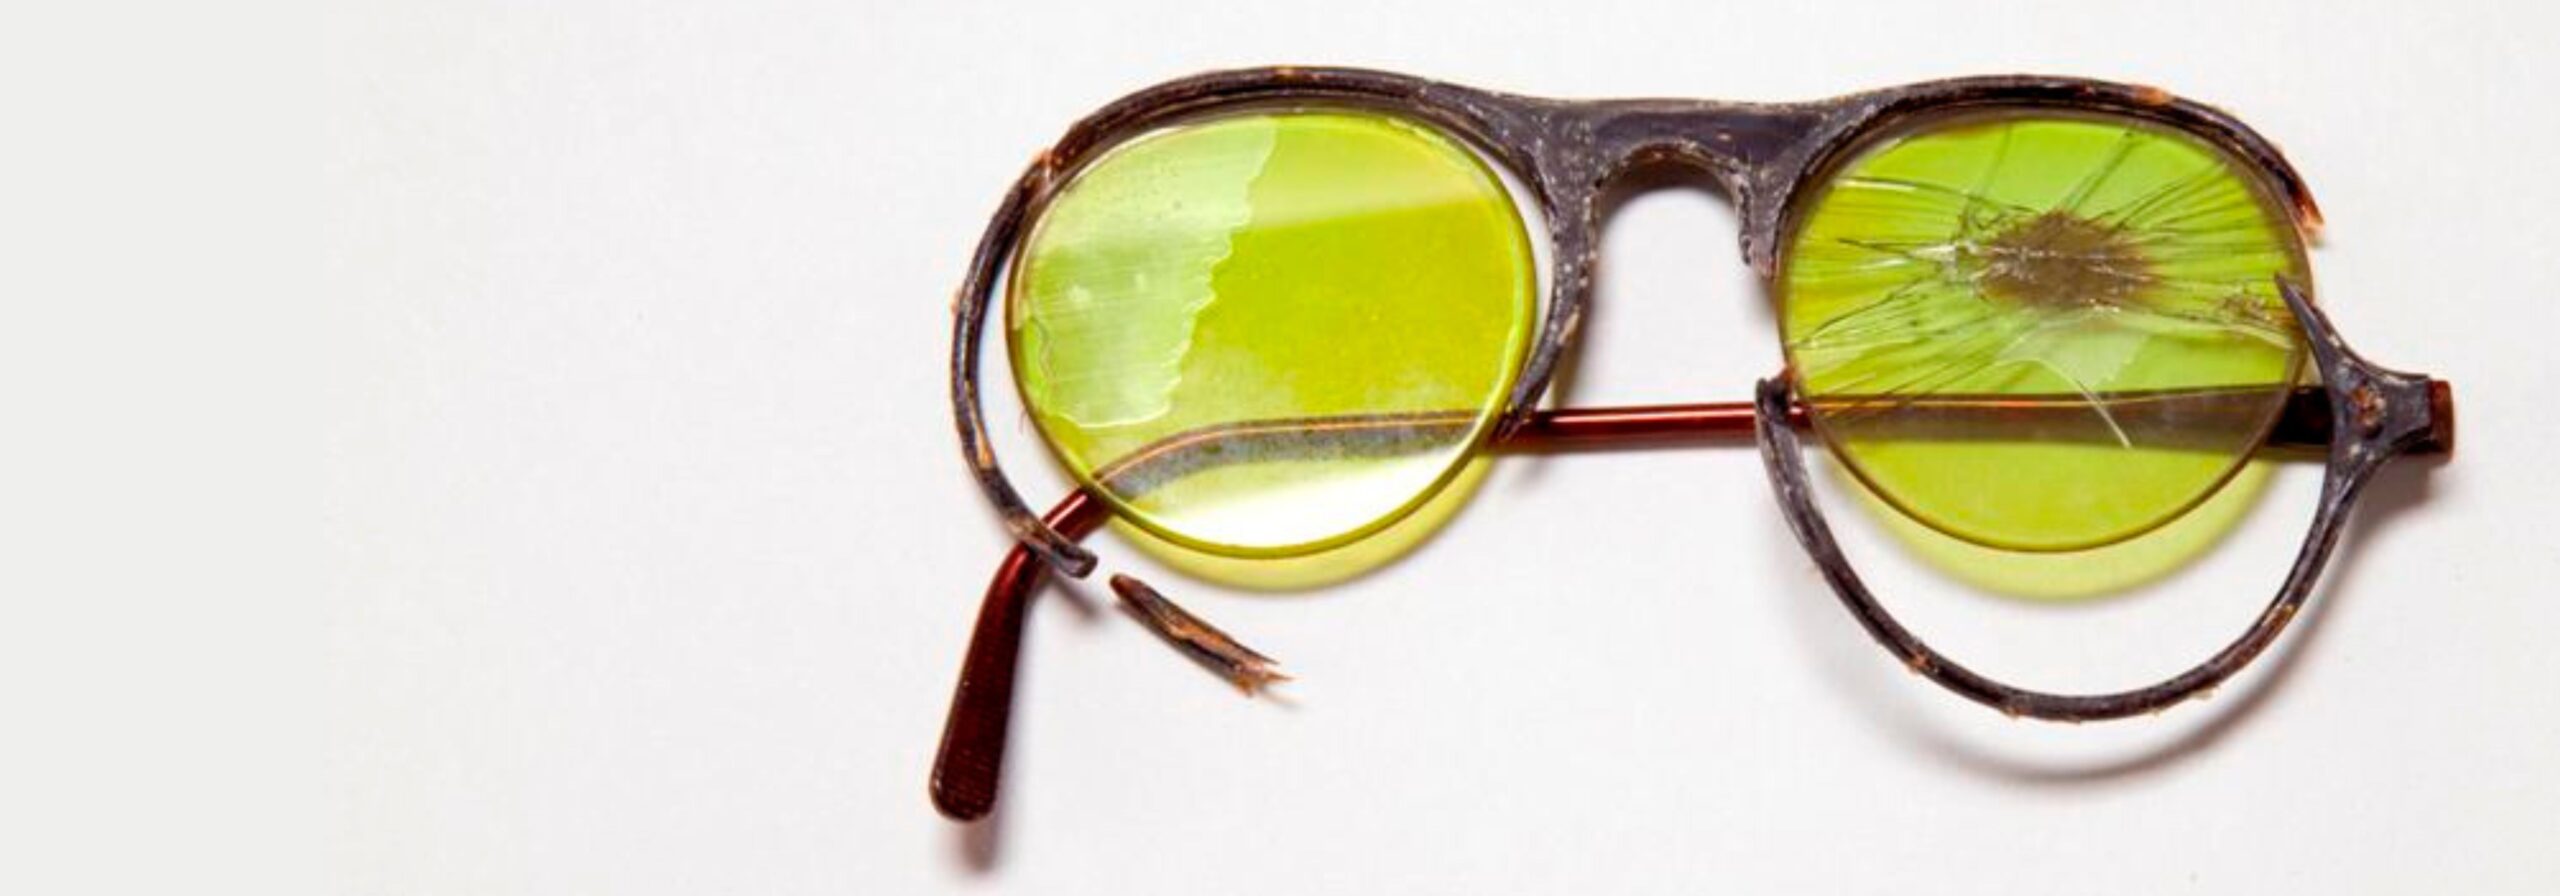 image of a broken pair of glasses promoting online exhibitions.